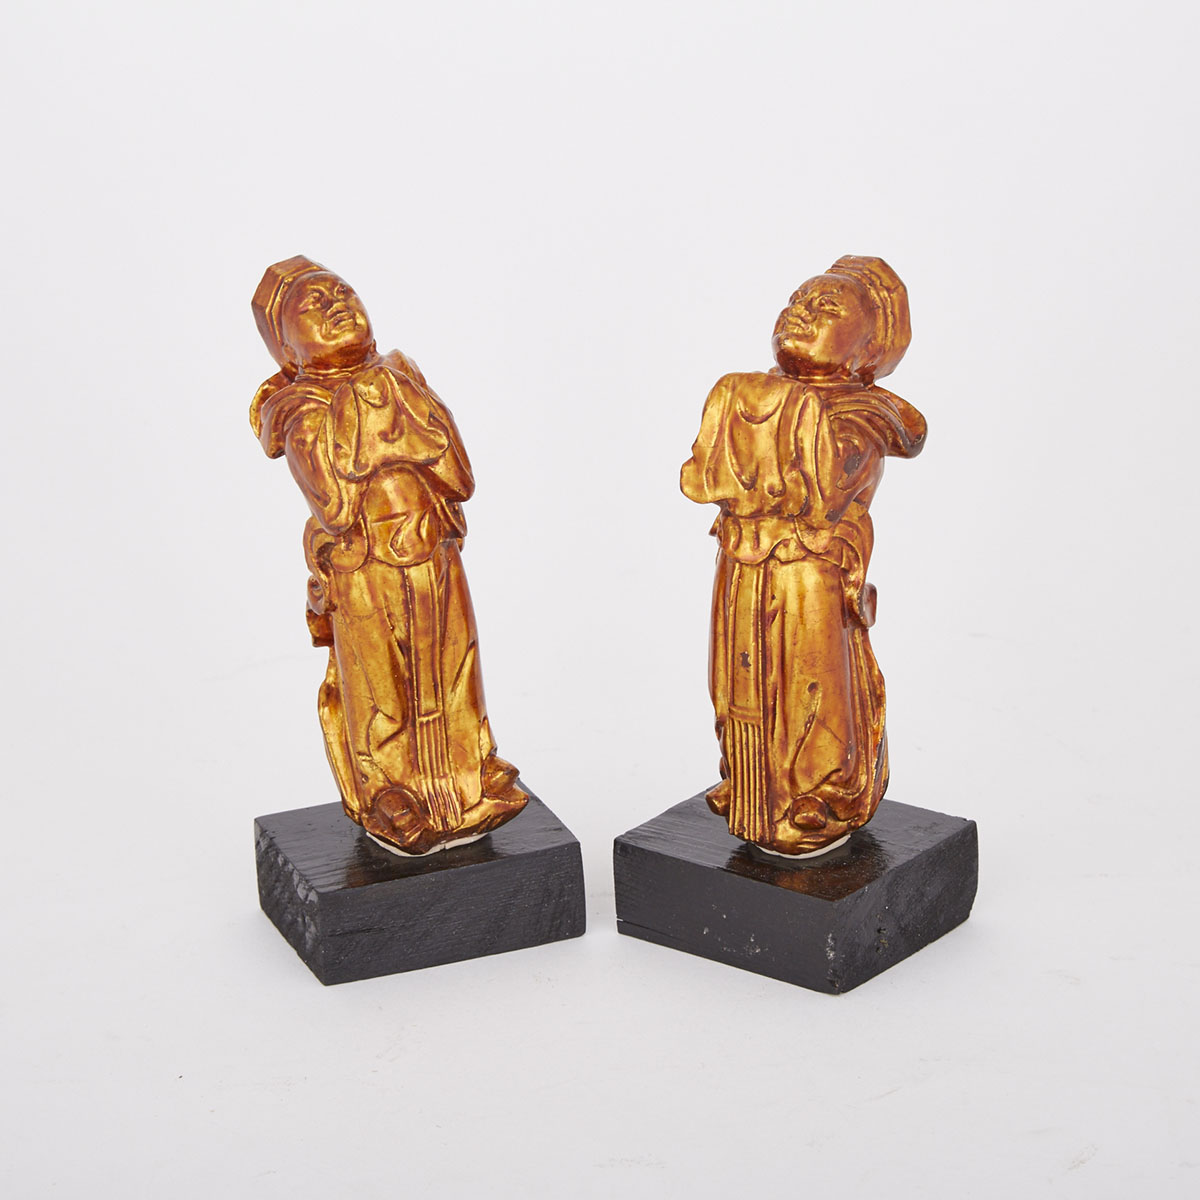 Pair of Lacquered Daoist Deities, Early to Mid 20th Century